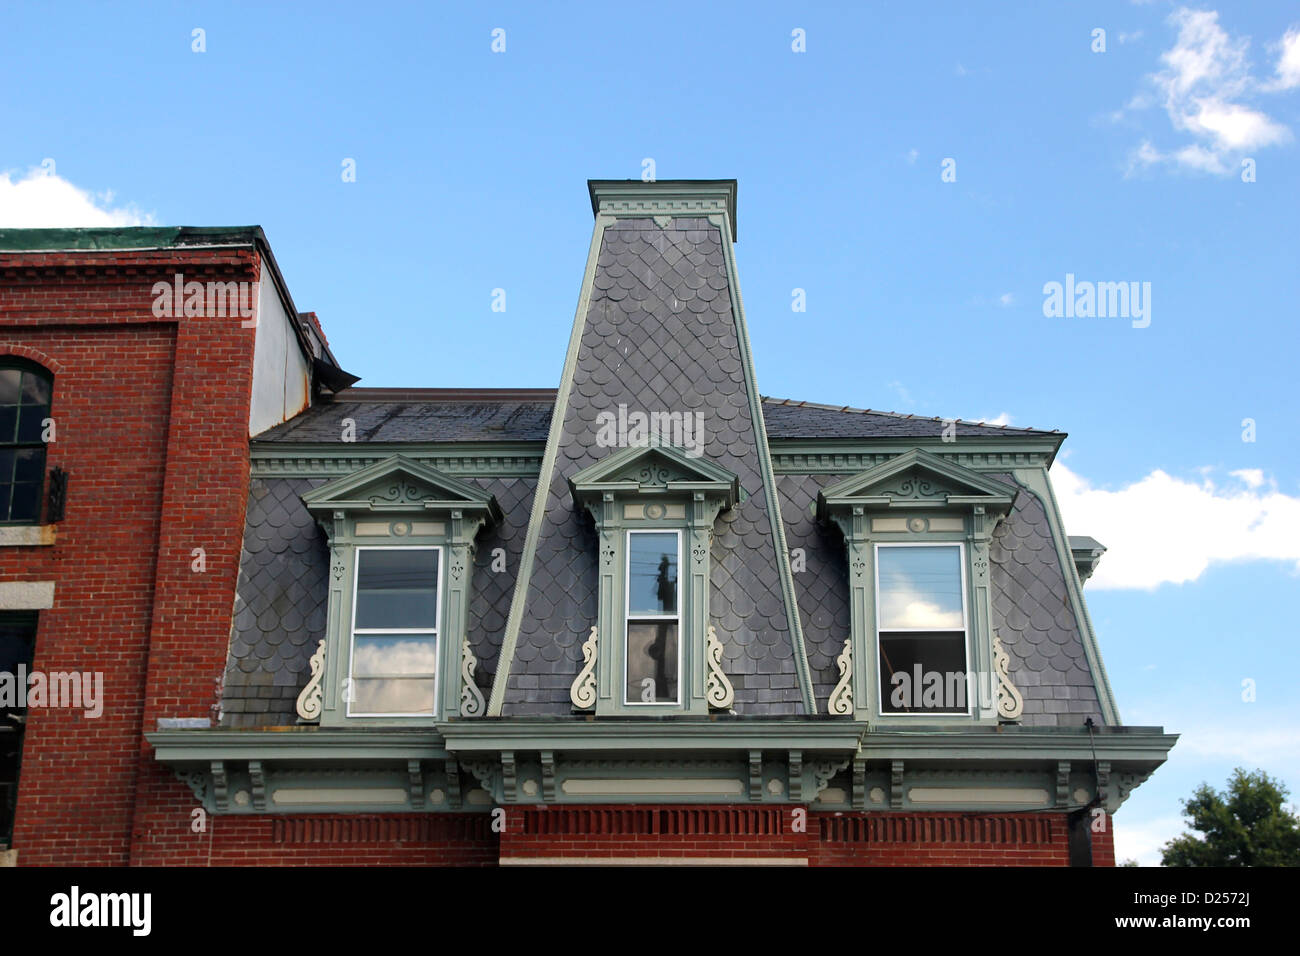 Detail of the ornate top storey and roof of a building in Searsport, Maine Stock Photo